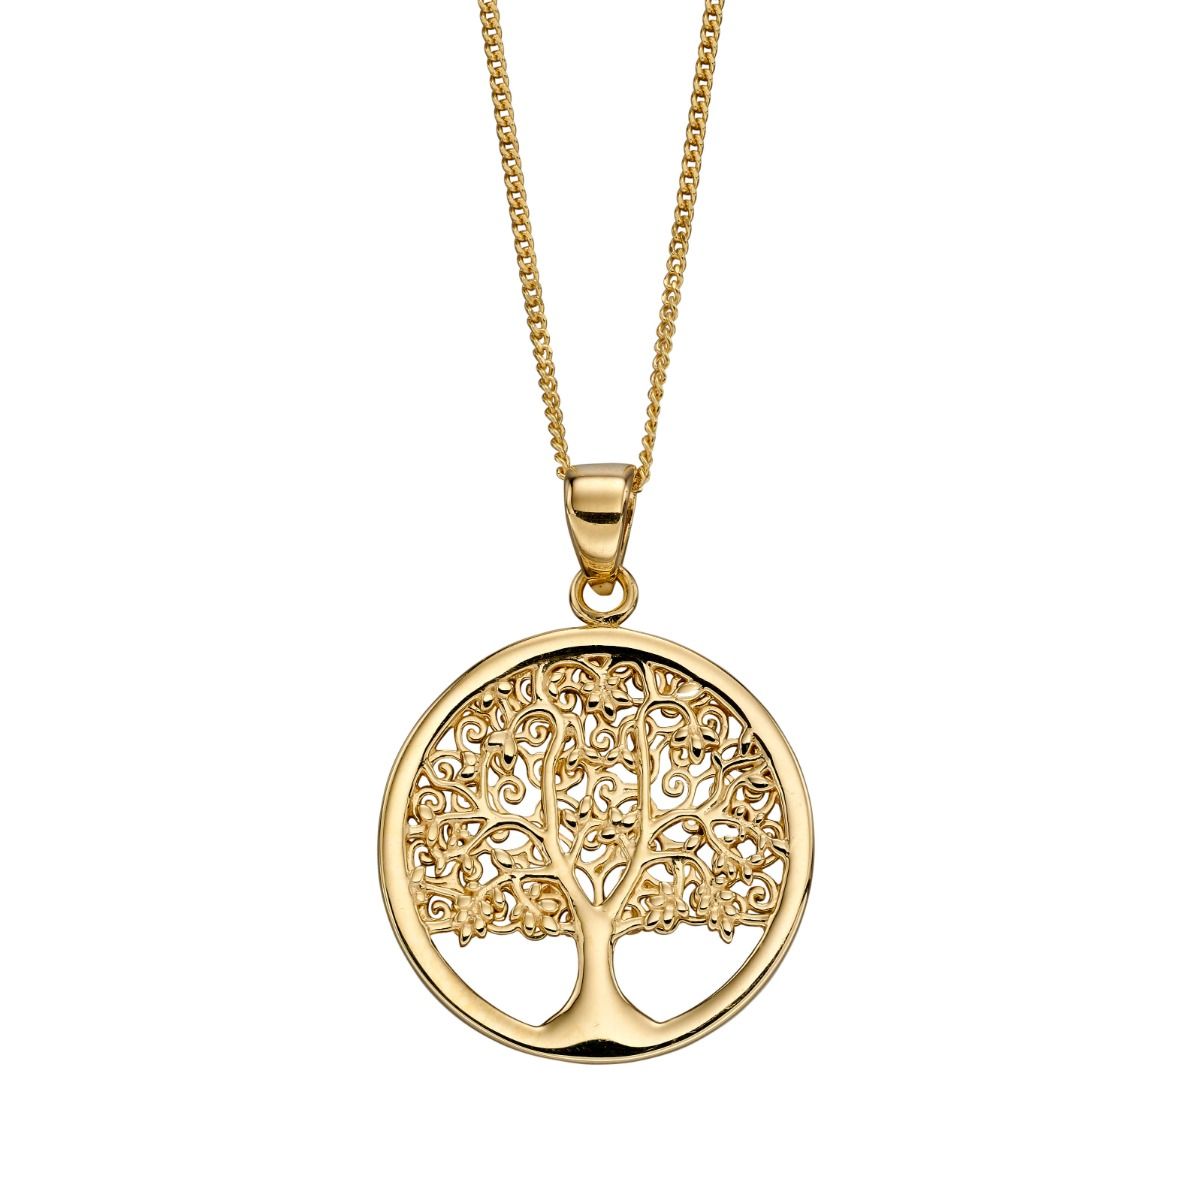 Detailed Tree of Life Pendant in 9ct Yellow Gold